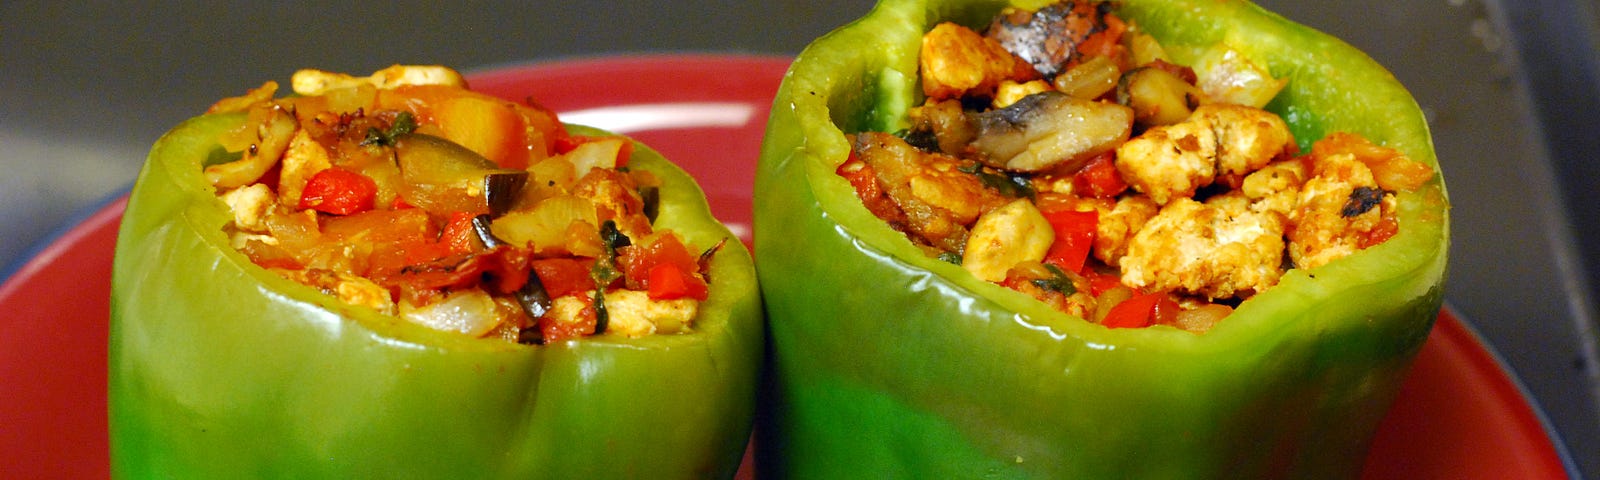 Two uncooked green capsicums (bell peppers) filled with a mixture of chopped vegetables, standing on a red plate.